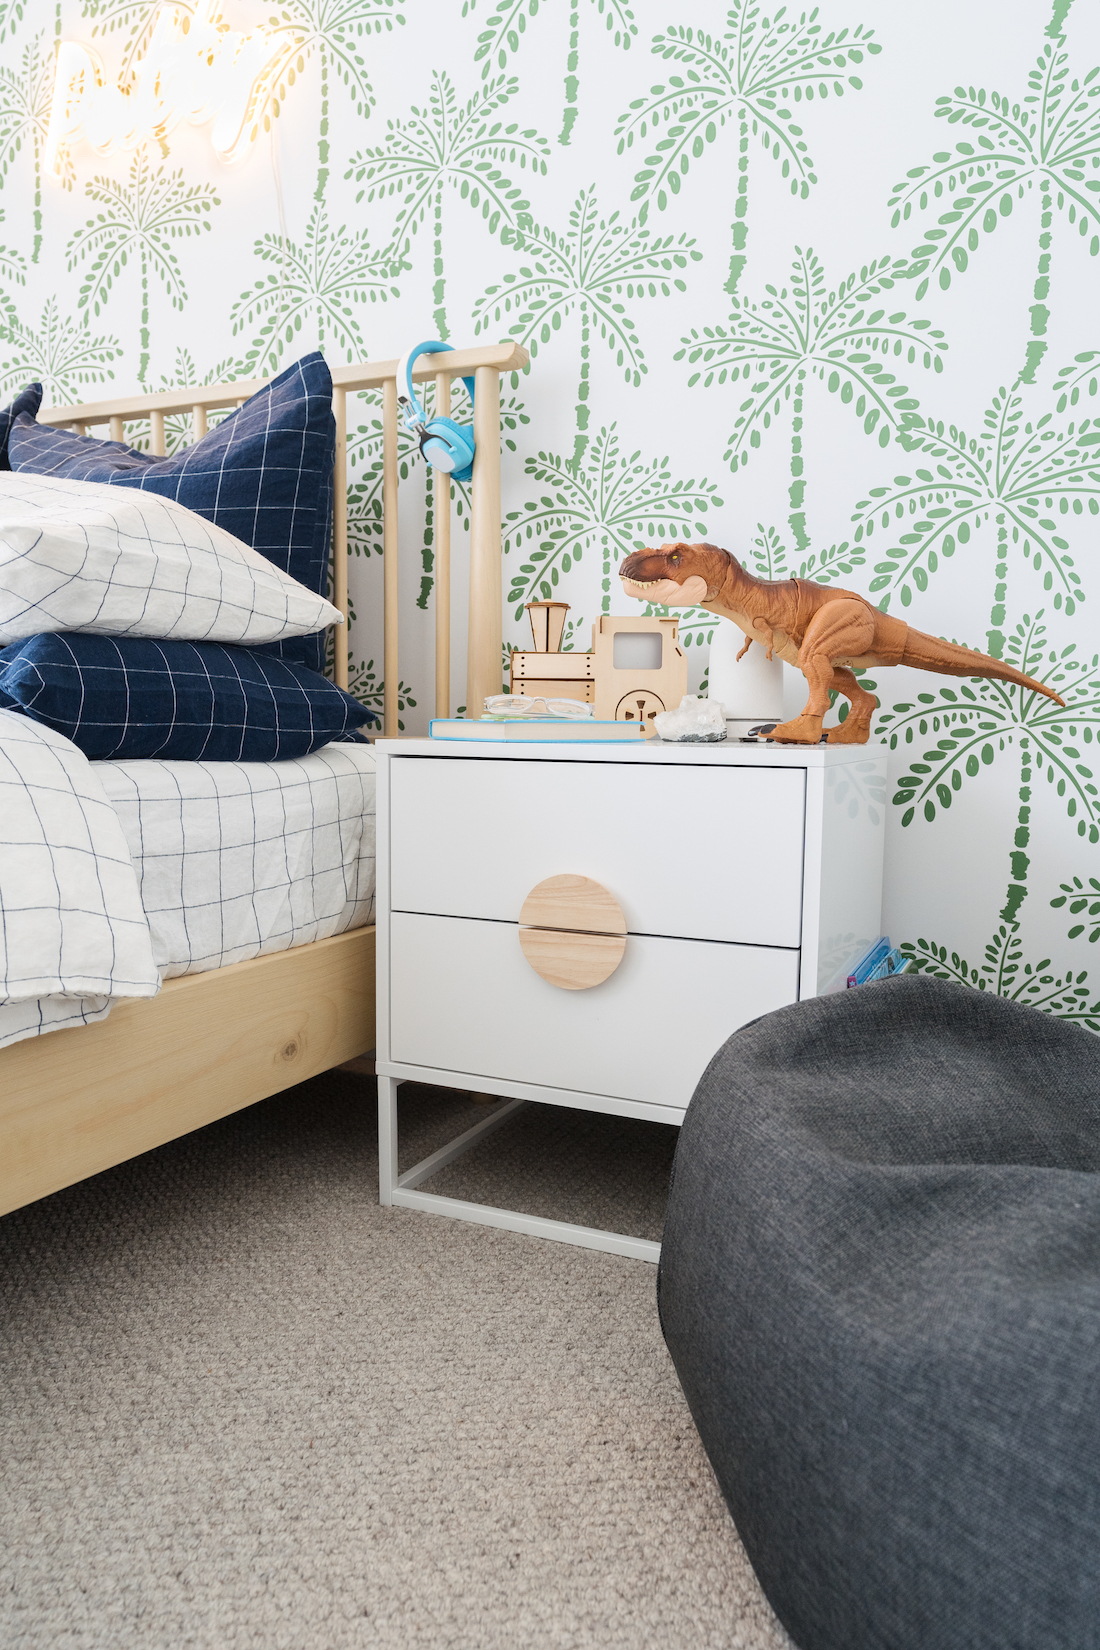 Palm print wallpaper was the inspiration in this boy's bedroom design